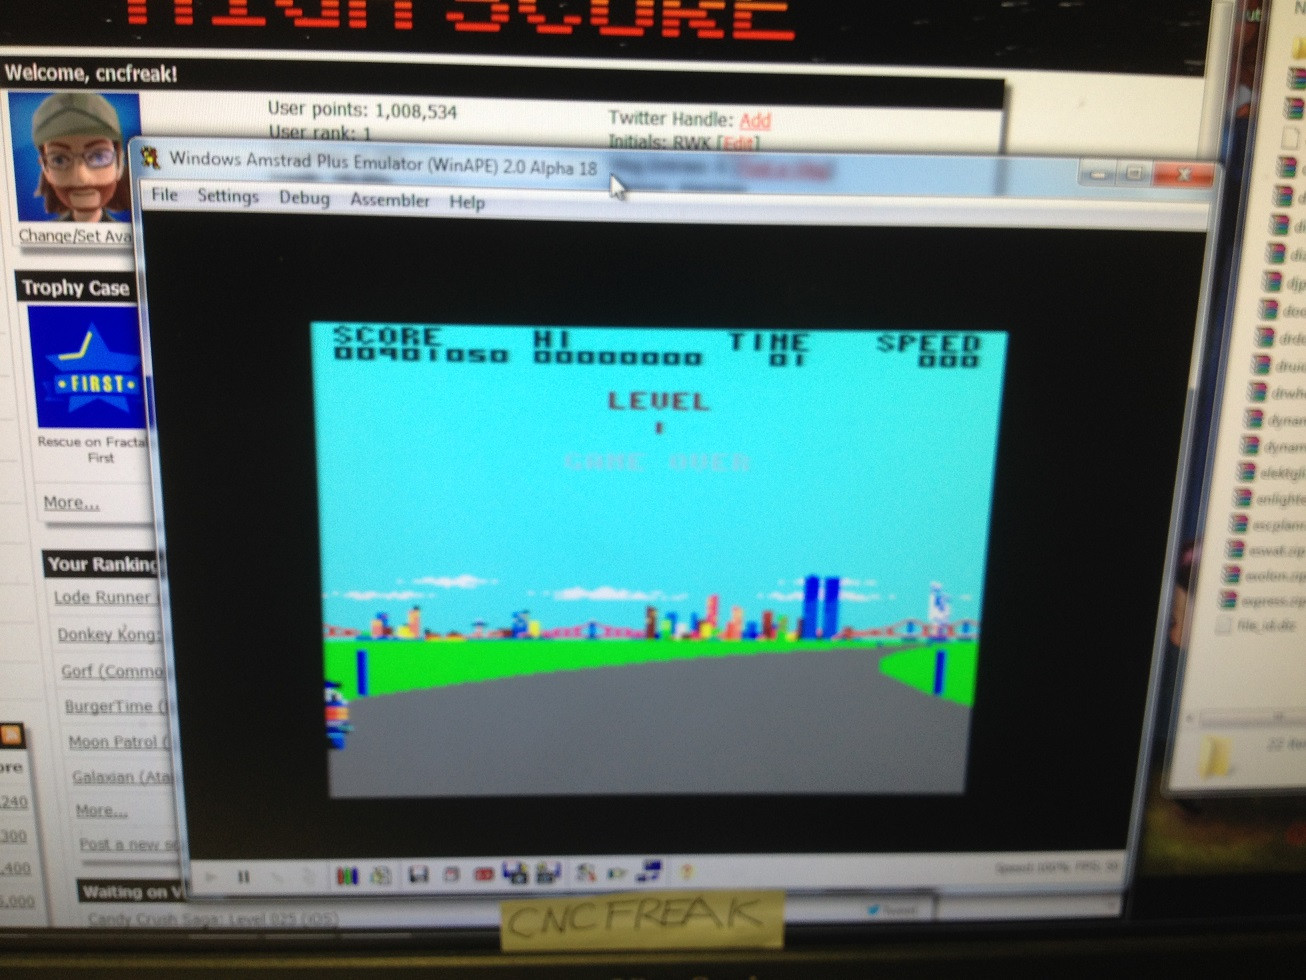 cncfreak: Crazy Cars (Amstrad CPC Emulated) 901,050 points on 2013-10-17 10:29:37